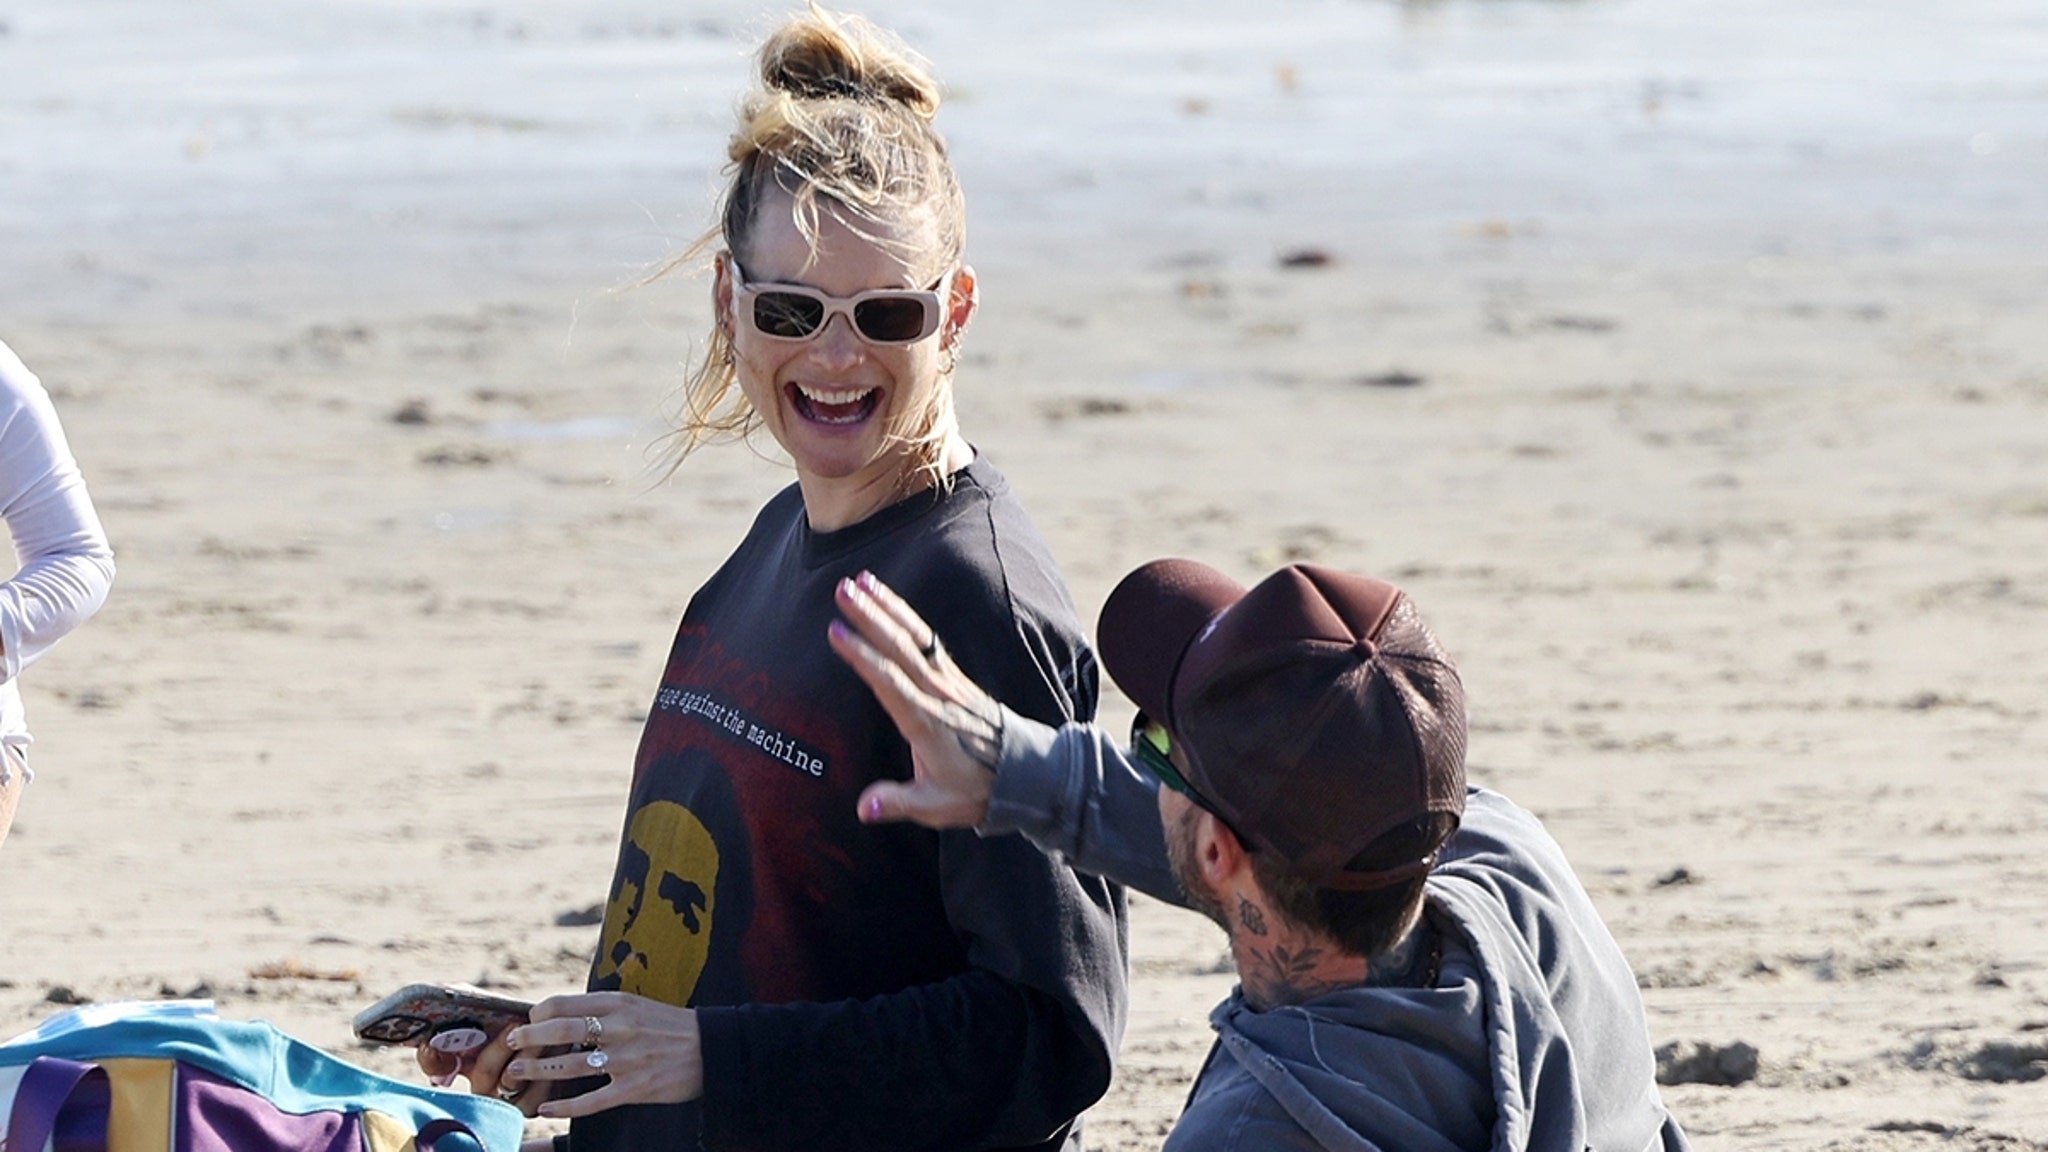 Adam Levine and Behati Prinsloo All Smiles Hitting Beach After Sexting Scandal